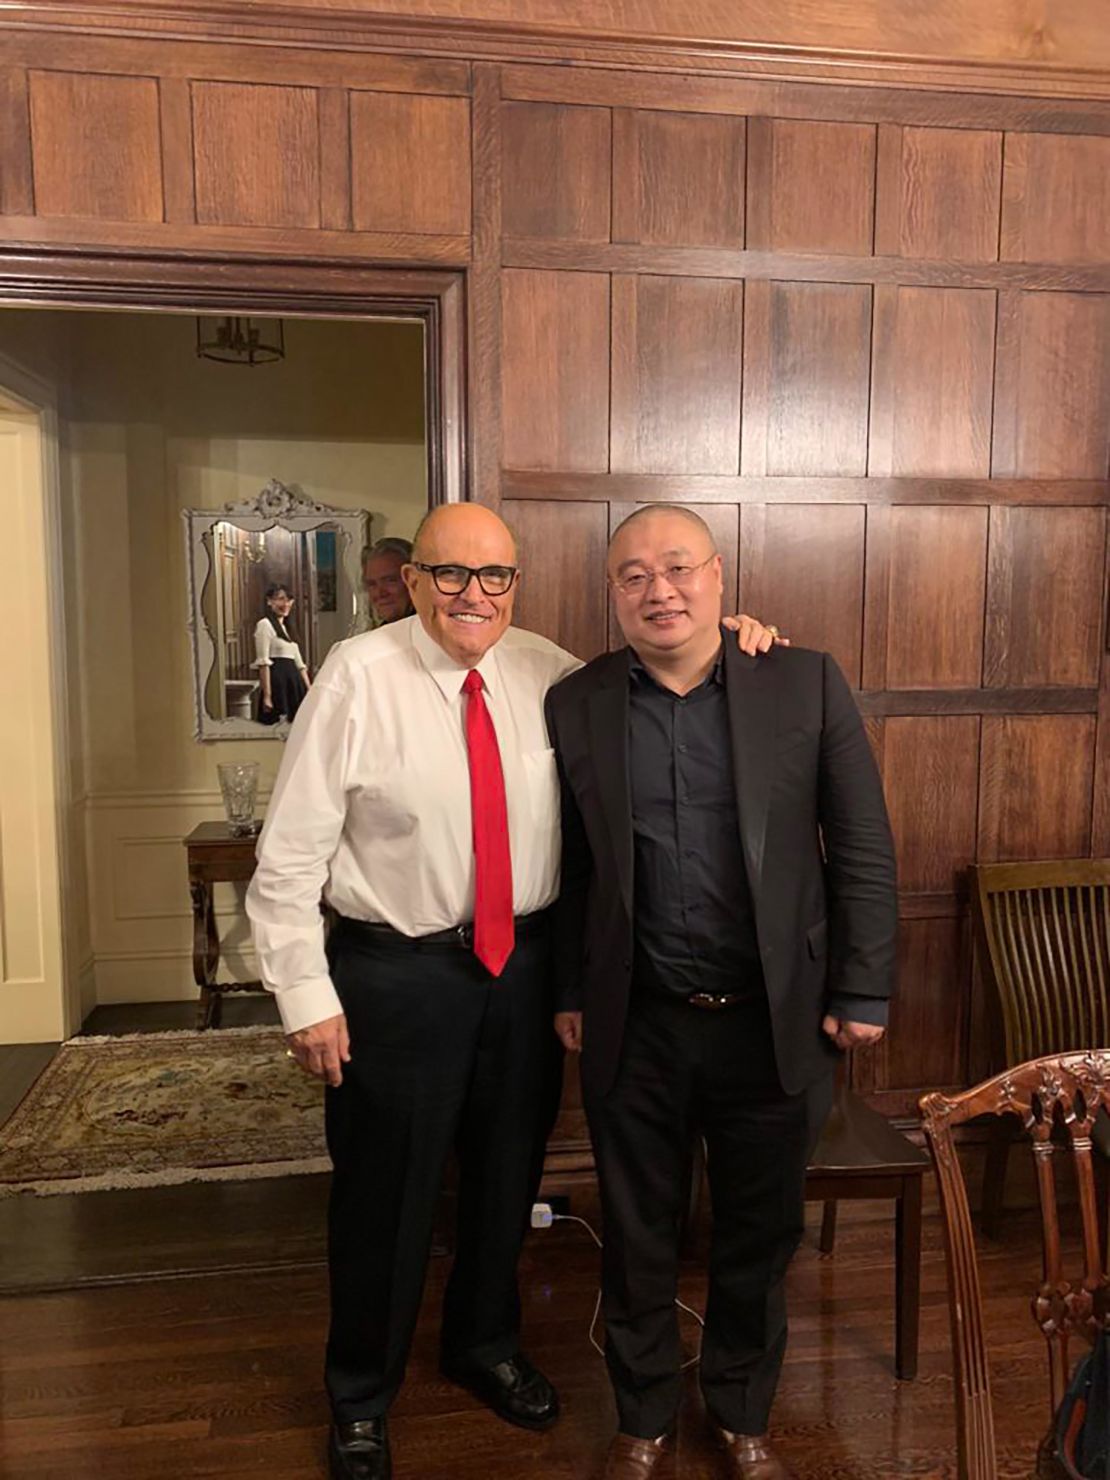 This photo appears to capture the reflection of virologist Li-Meng Yan in the mirror behind the two men in the foreground: Wang DingGang, board chair of the Rule of Law Society, and former New York City Mayor Rudy Giuliani. Bannon's image can also be seen in the photo.